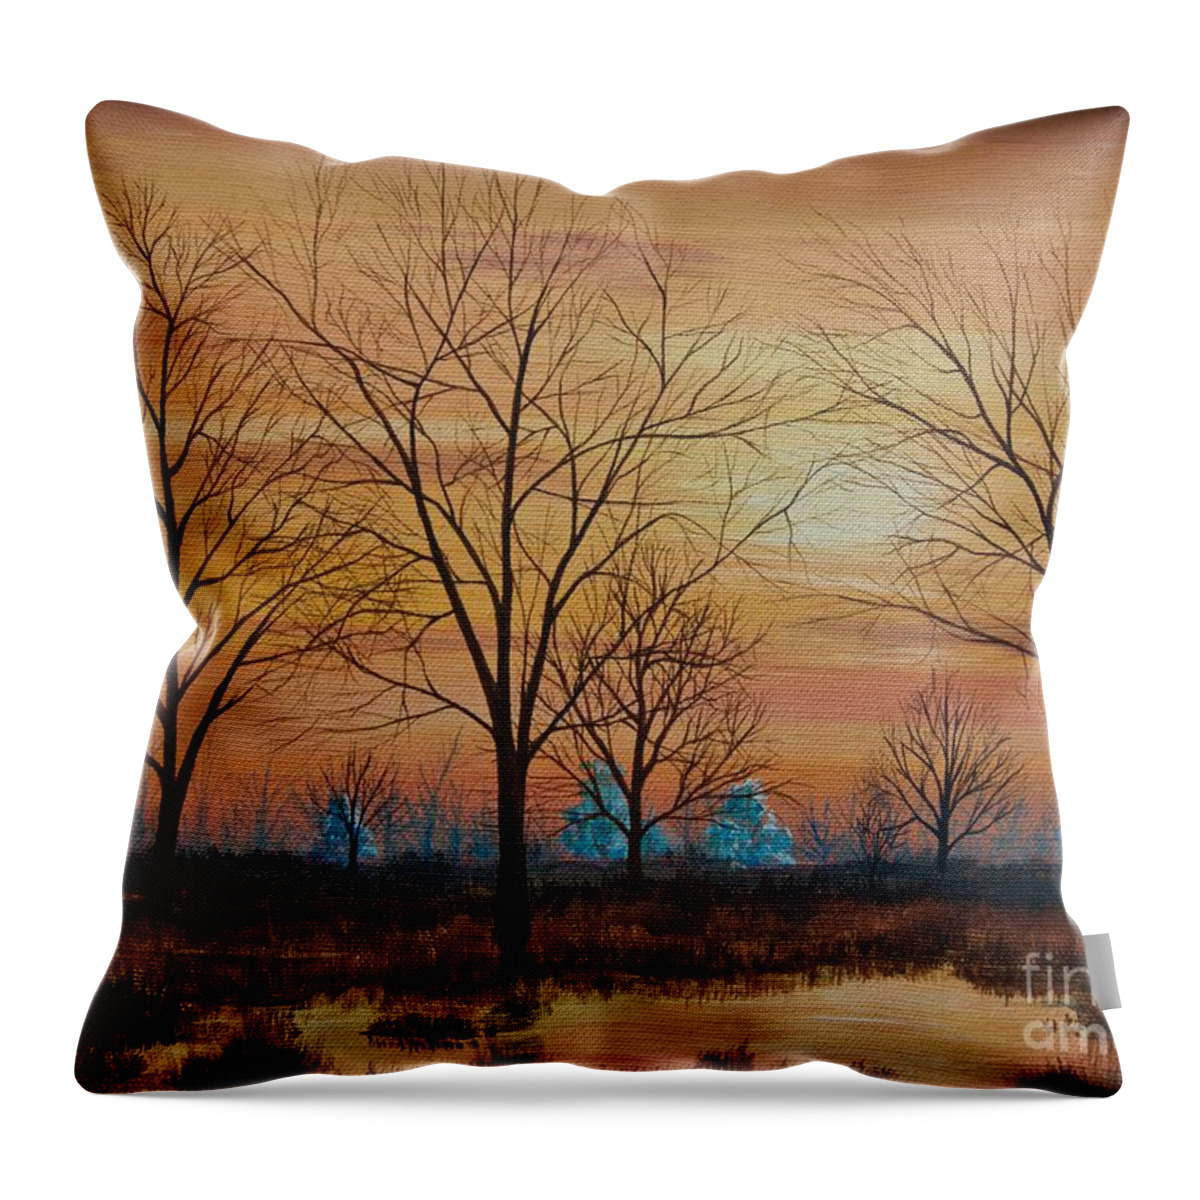 Potomac River Throw Pillow featuring the painting Patomac River Sunset by AnnaJo Vahle